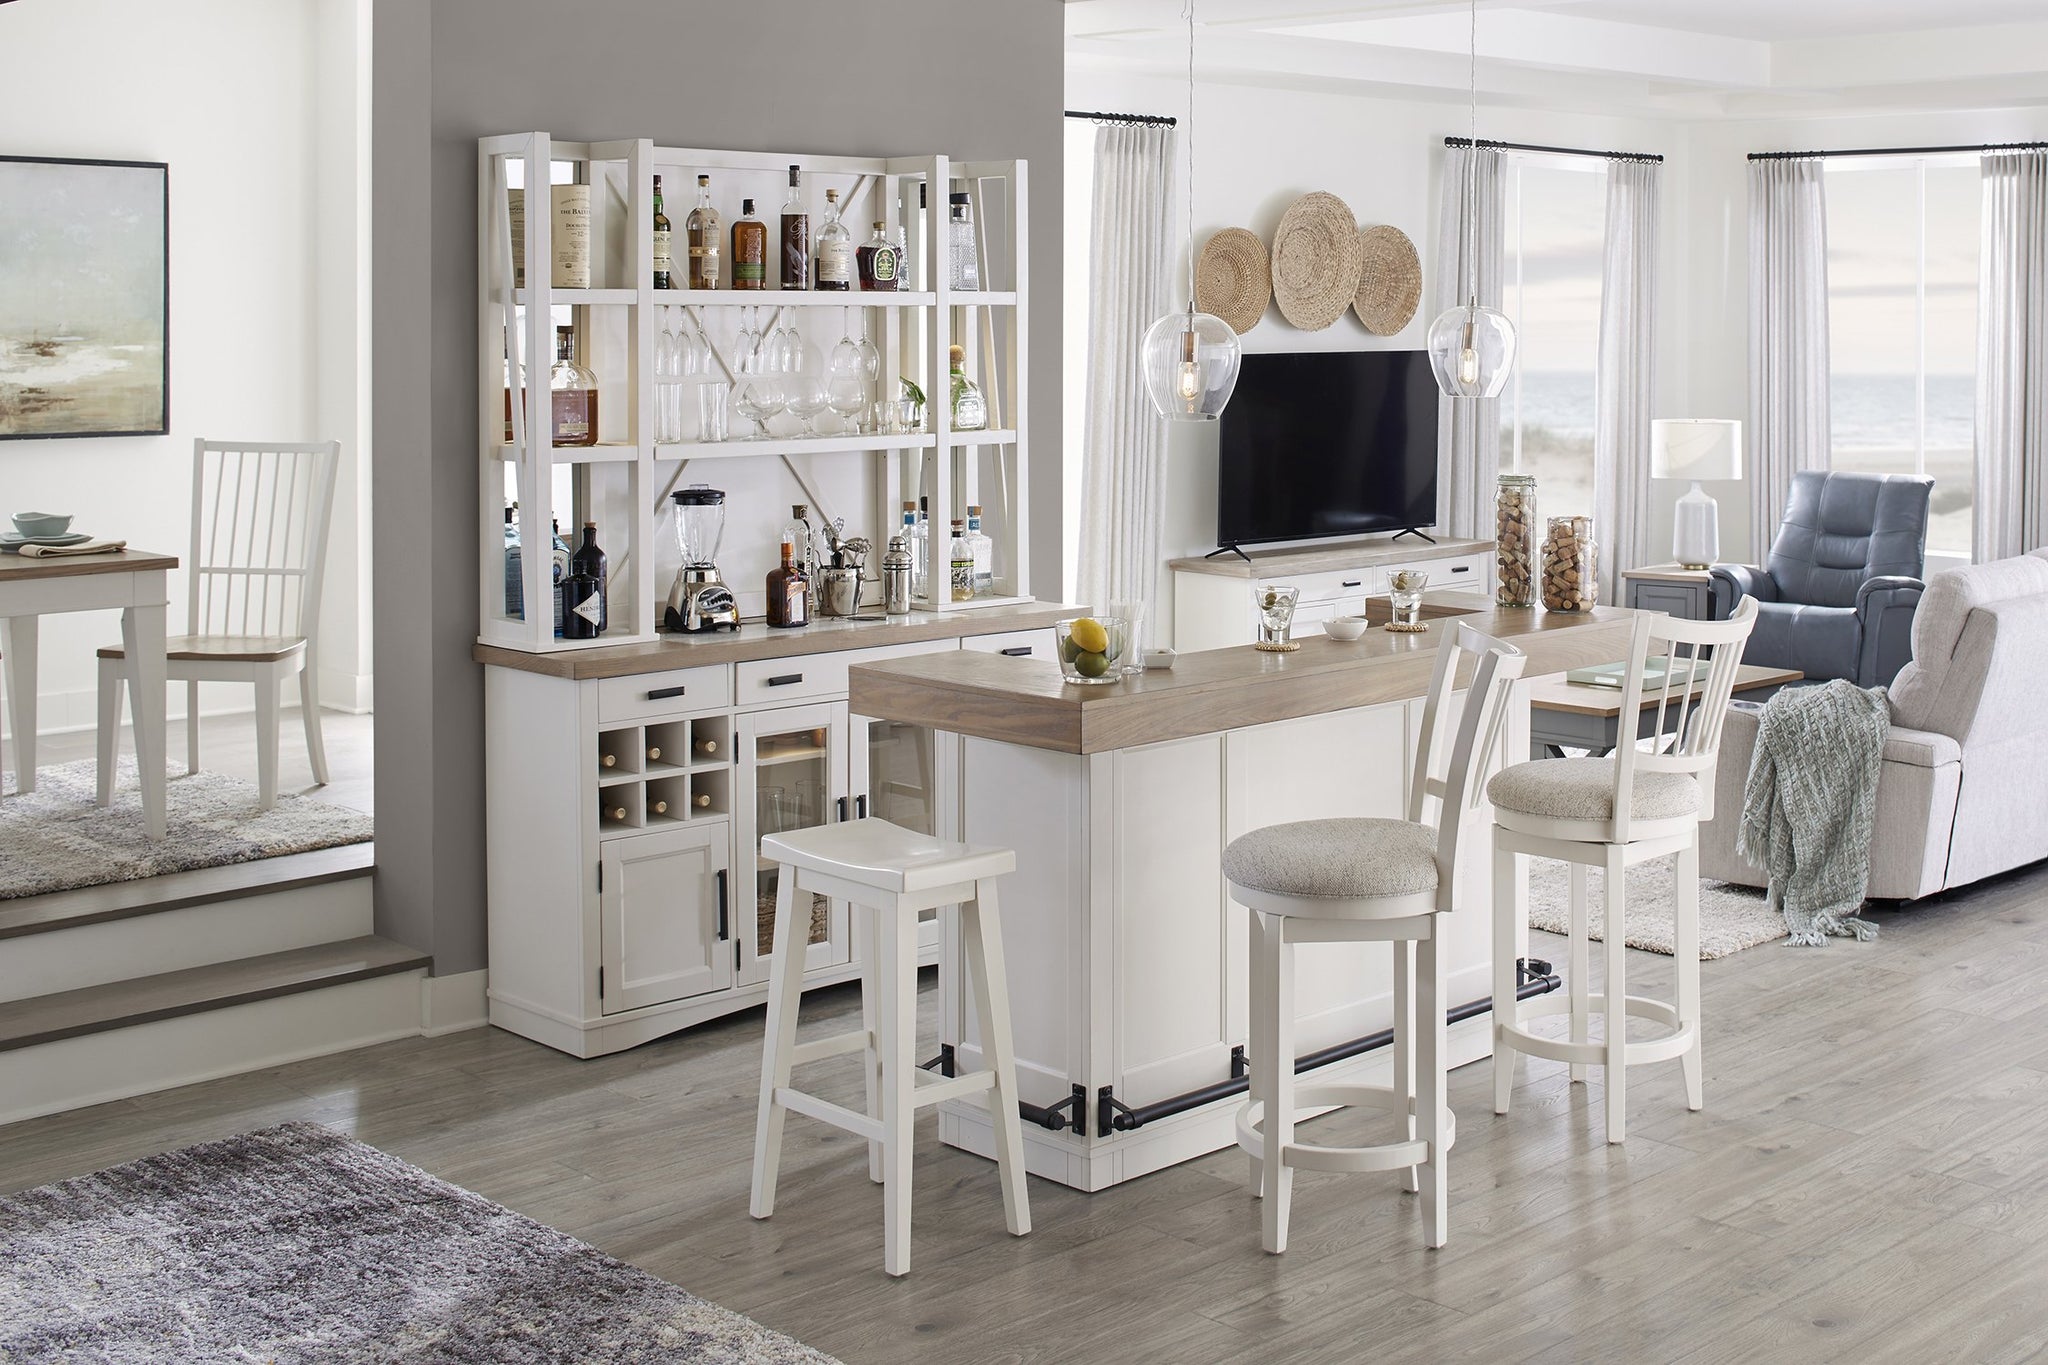 DINING Bar quartz 78 MODERN - with AMERICANA Complete in. Parker House Furniture